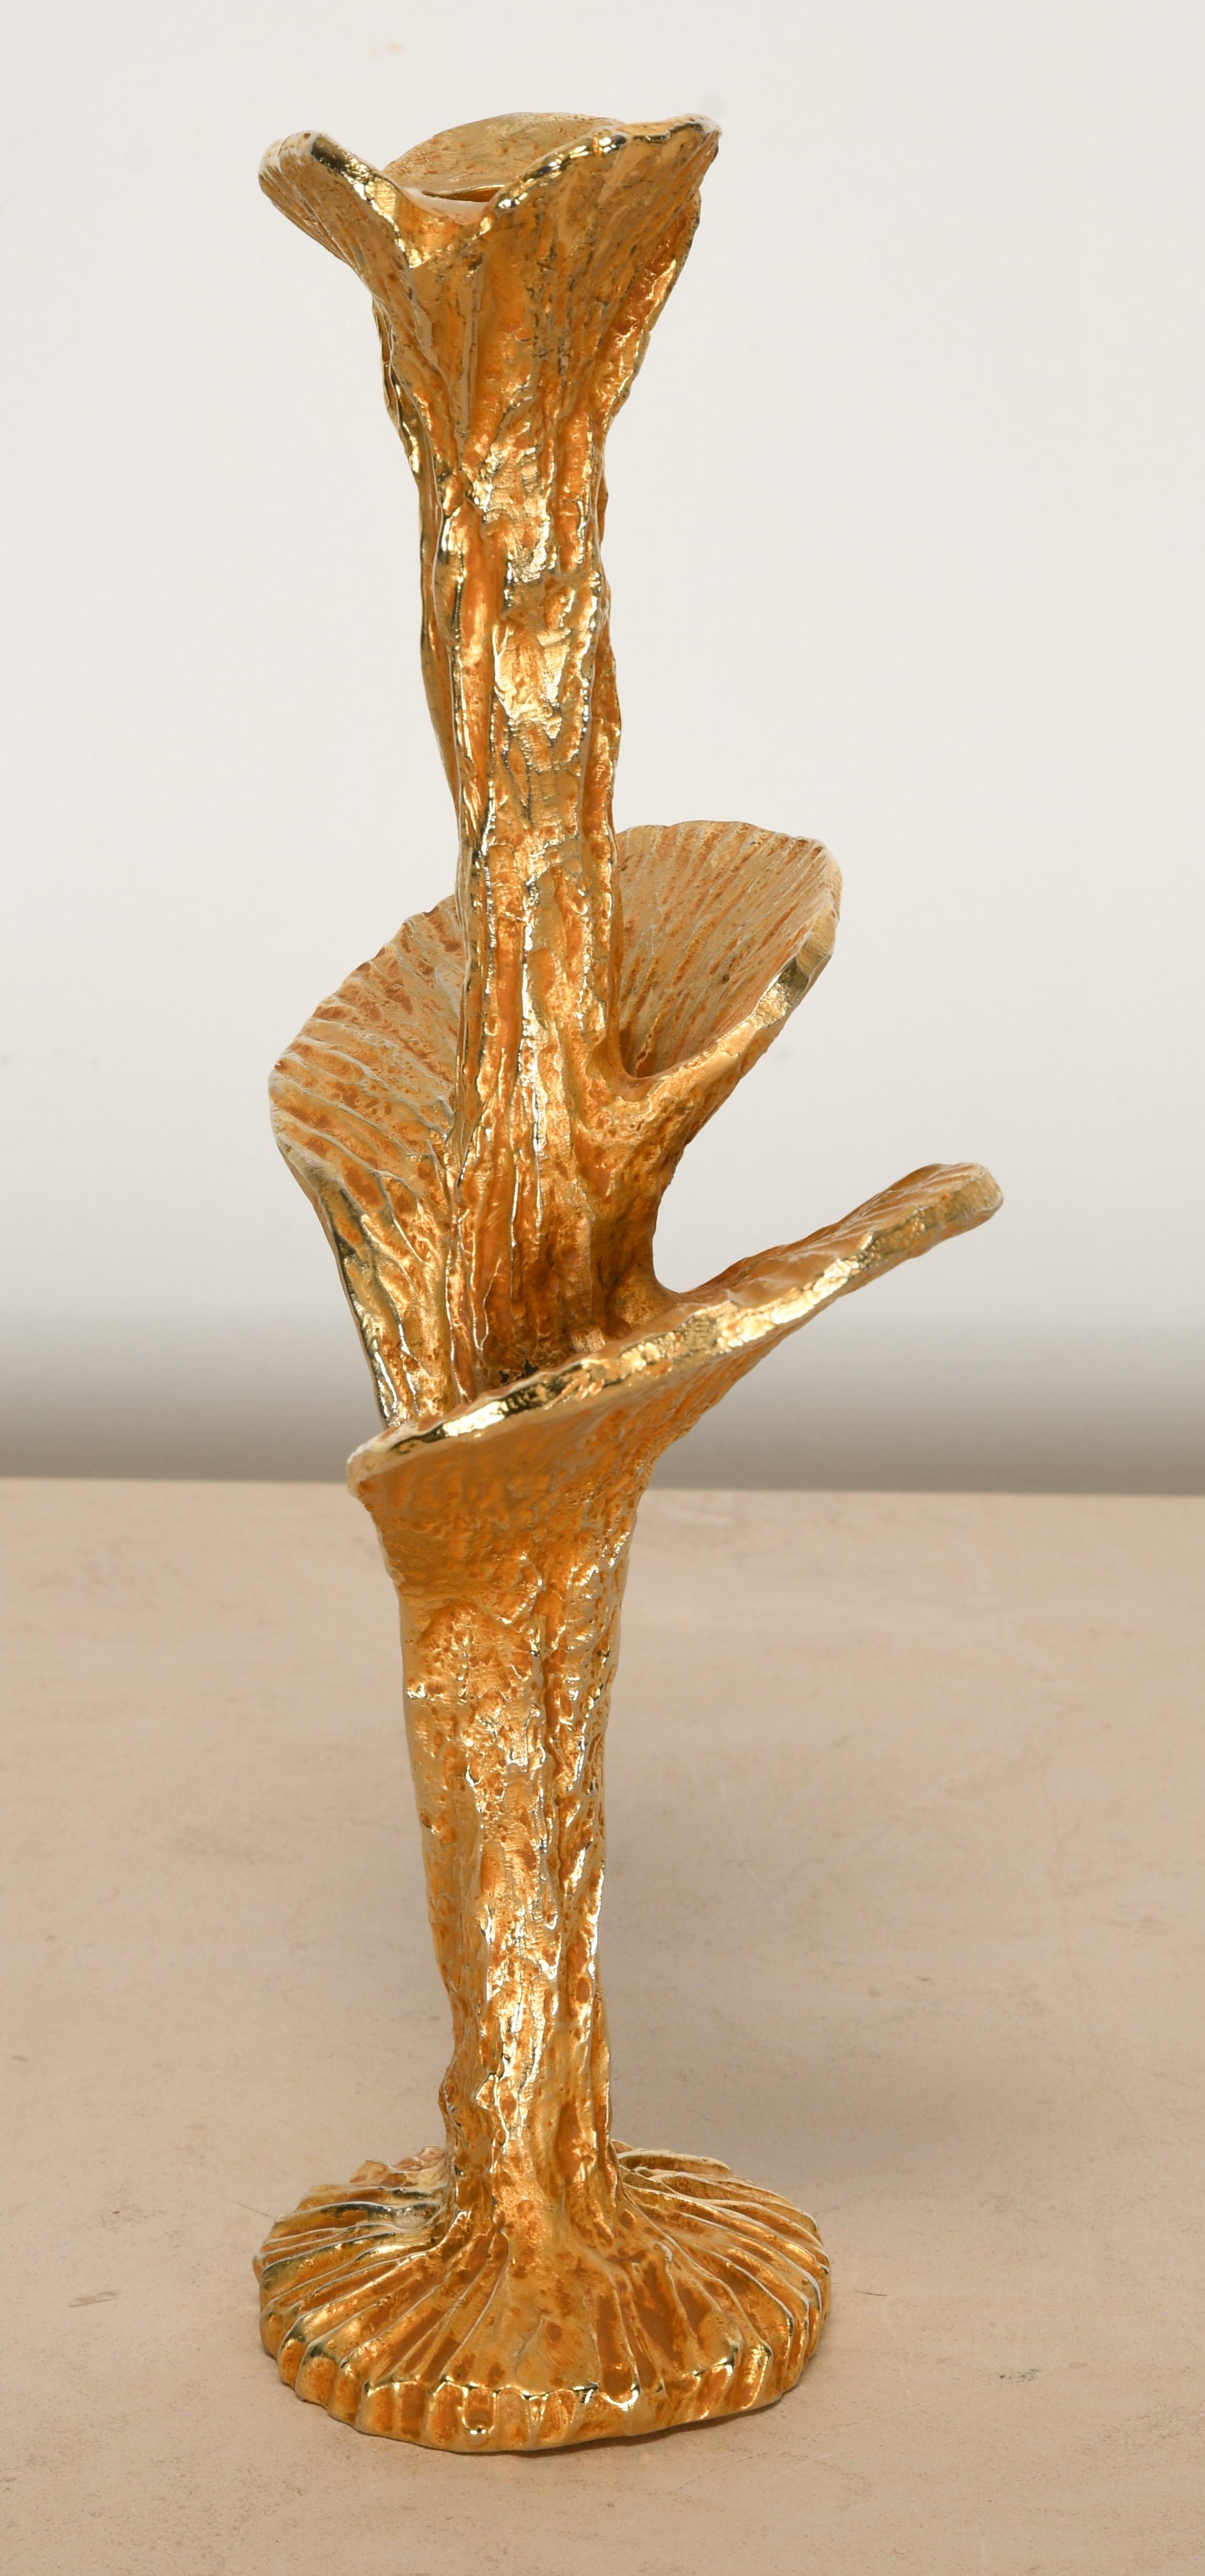 Gilt Stephane Galerneau Gold Plated Pewter Candlestick, 1990s